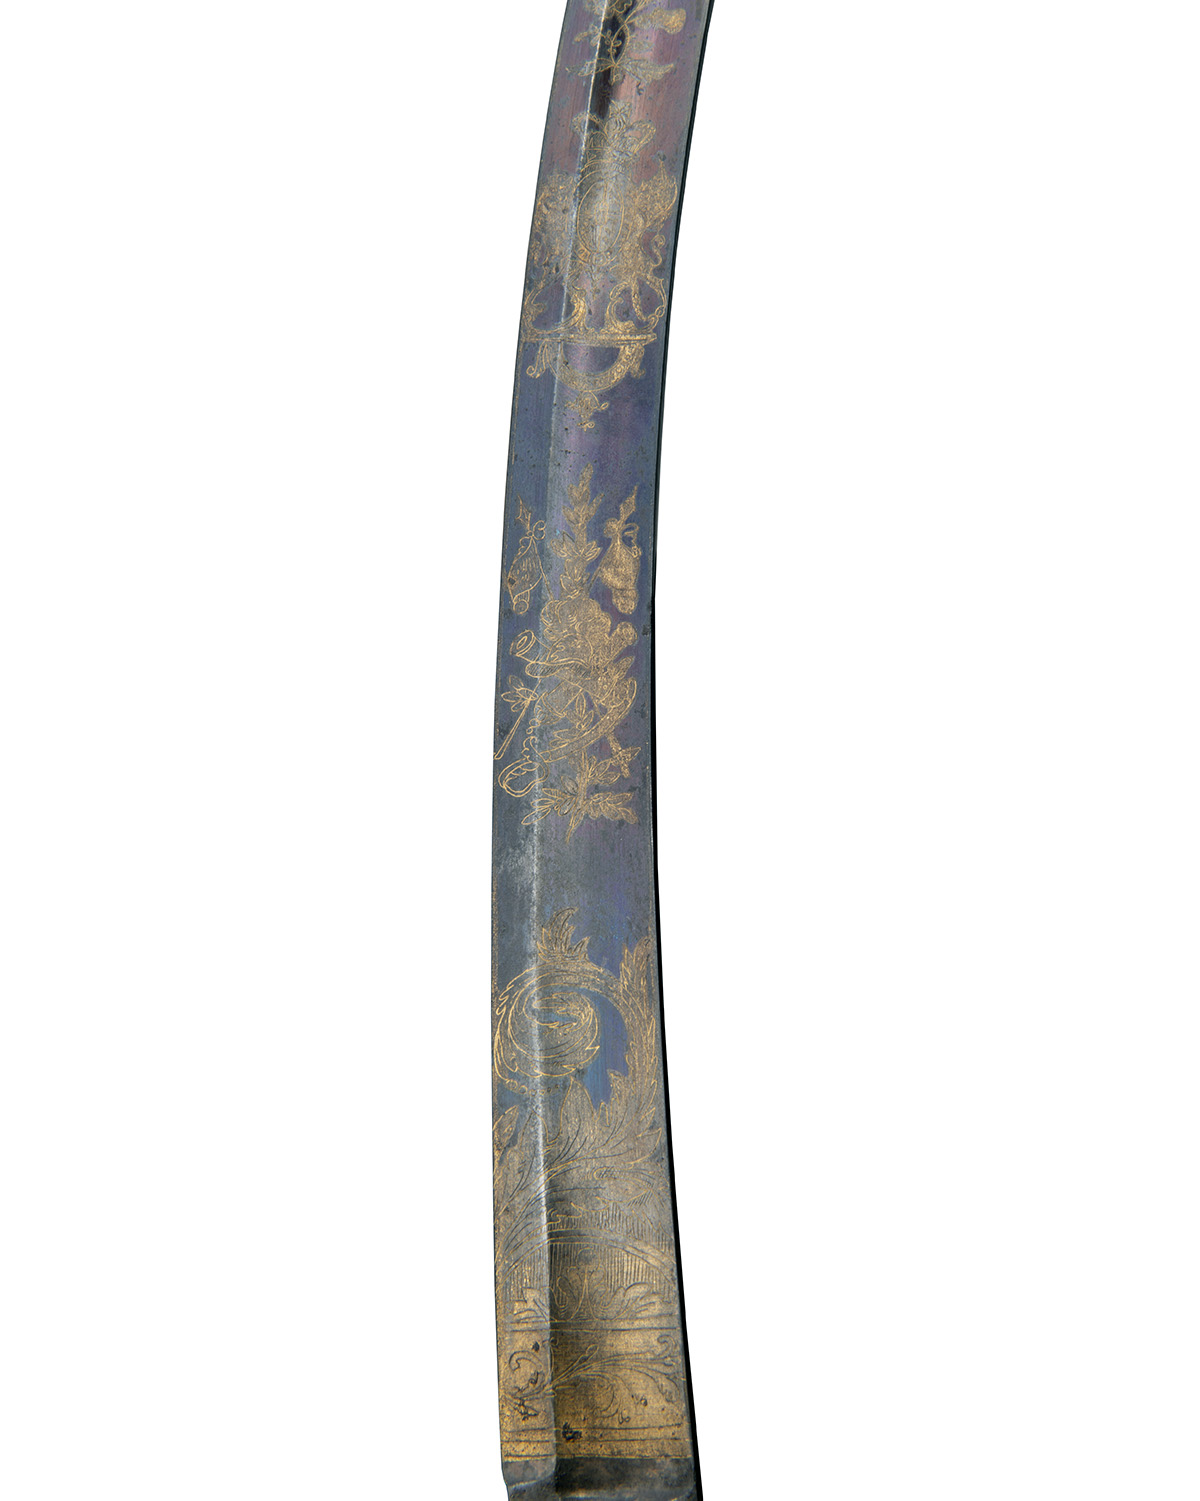 A BRITISH 1803 PATTERN INFANTRY or FLANK OFFICER'S SWORD WITH BLUE AND GILT BLADE, UNSIGNED, circa - Image 6 of 7